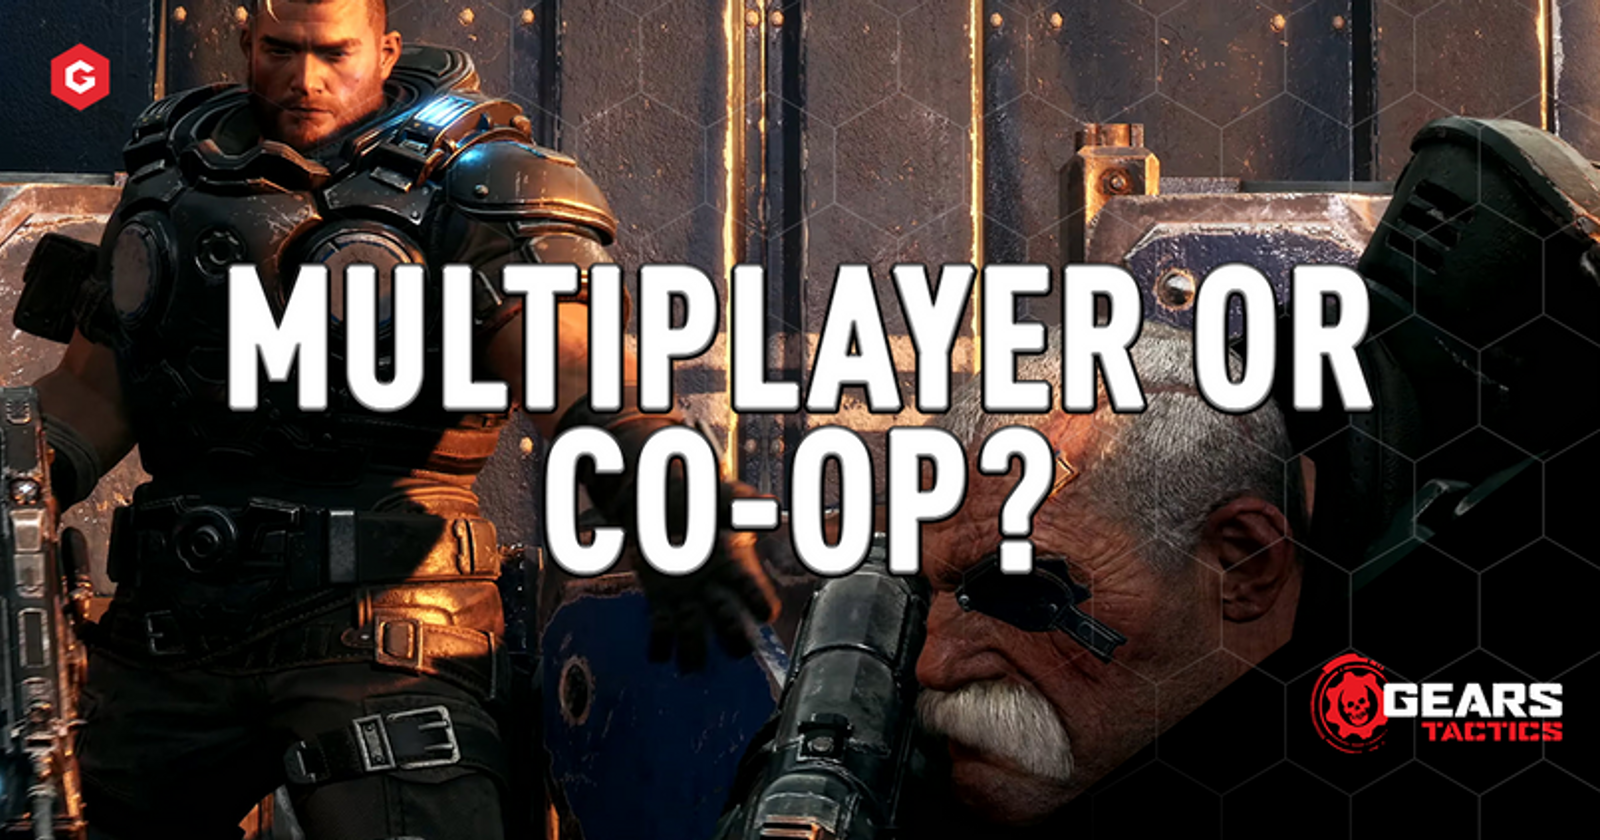 Co-Optimus - Gears 5 (Xbox One) Co-Op Information